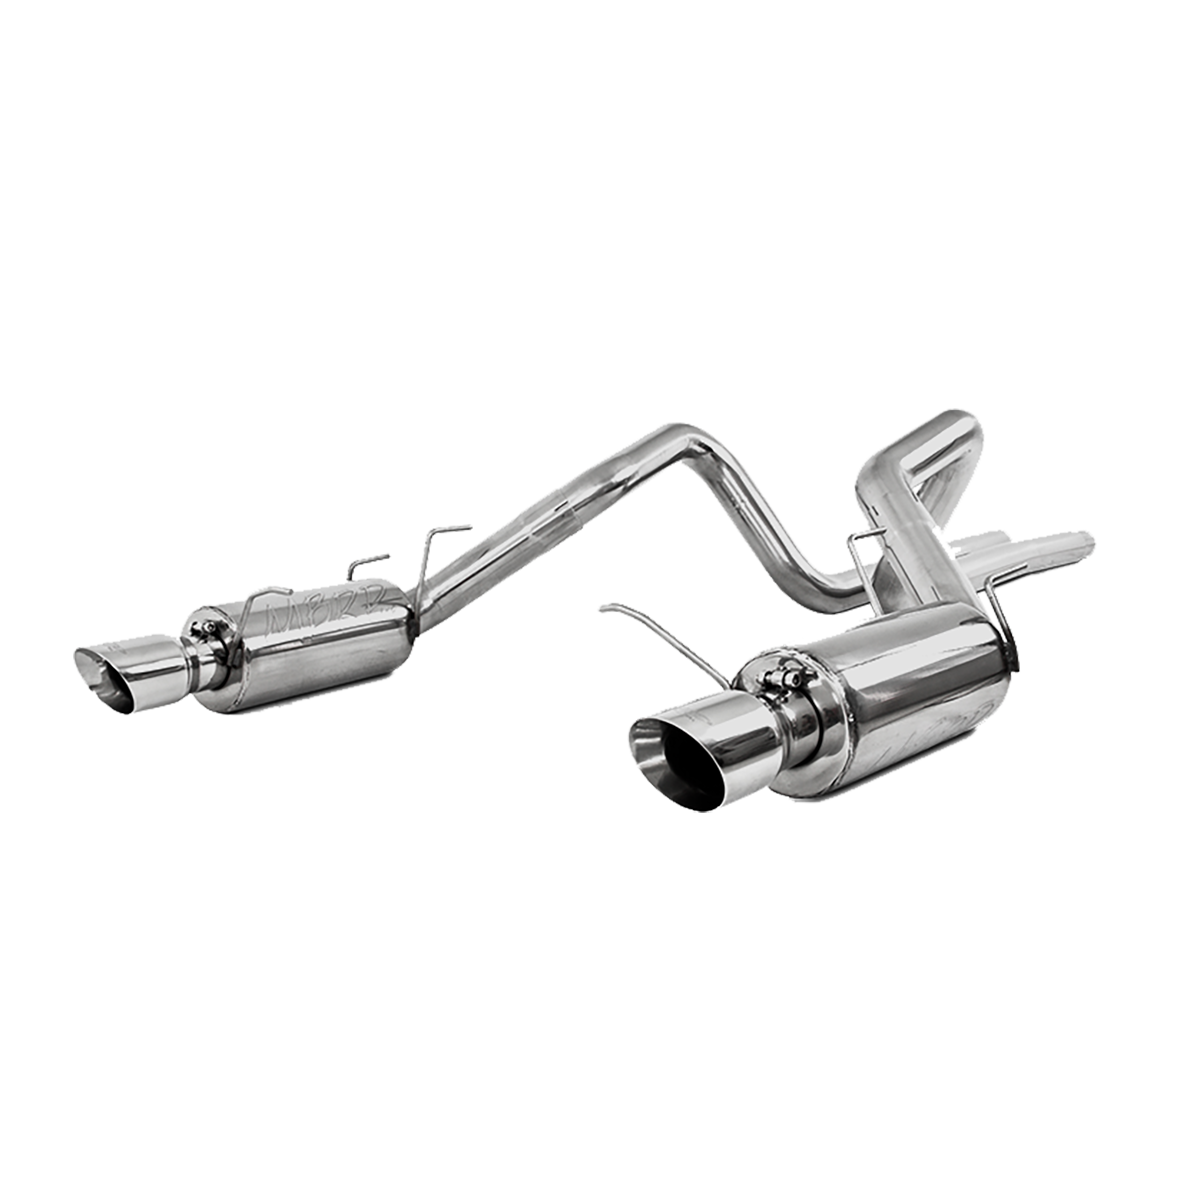 MBRP - MBRP Cat Back Exhaust System Dual Split Rear Street Version T409 Stainless Steel For 11-14 Ford Mustang GT 5.0L 11-12 Ford Shelby GT500 S7258409